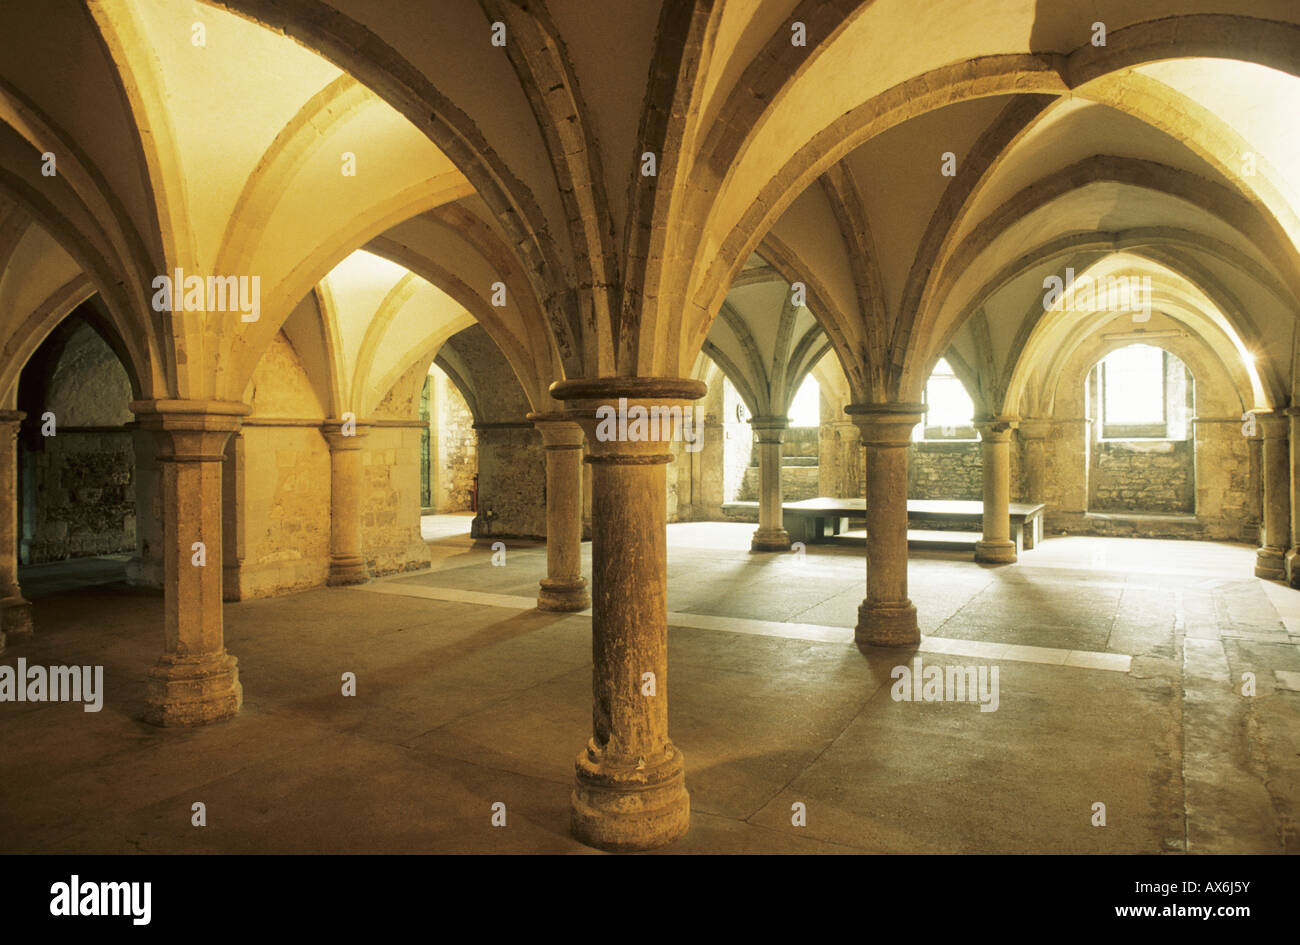 Rochester Cathedral Crypt Undercroft Kent archi medievali vault vaulting Inghilterra Inglese Regno Unito storia dell'architettura turismo Foto Stock